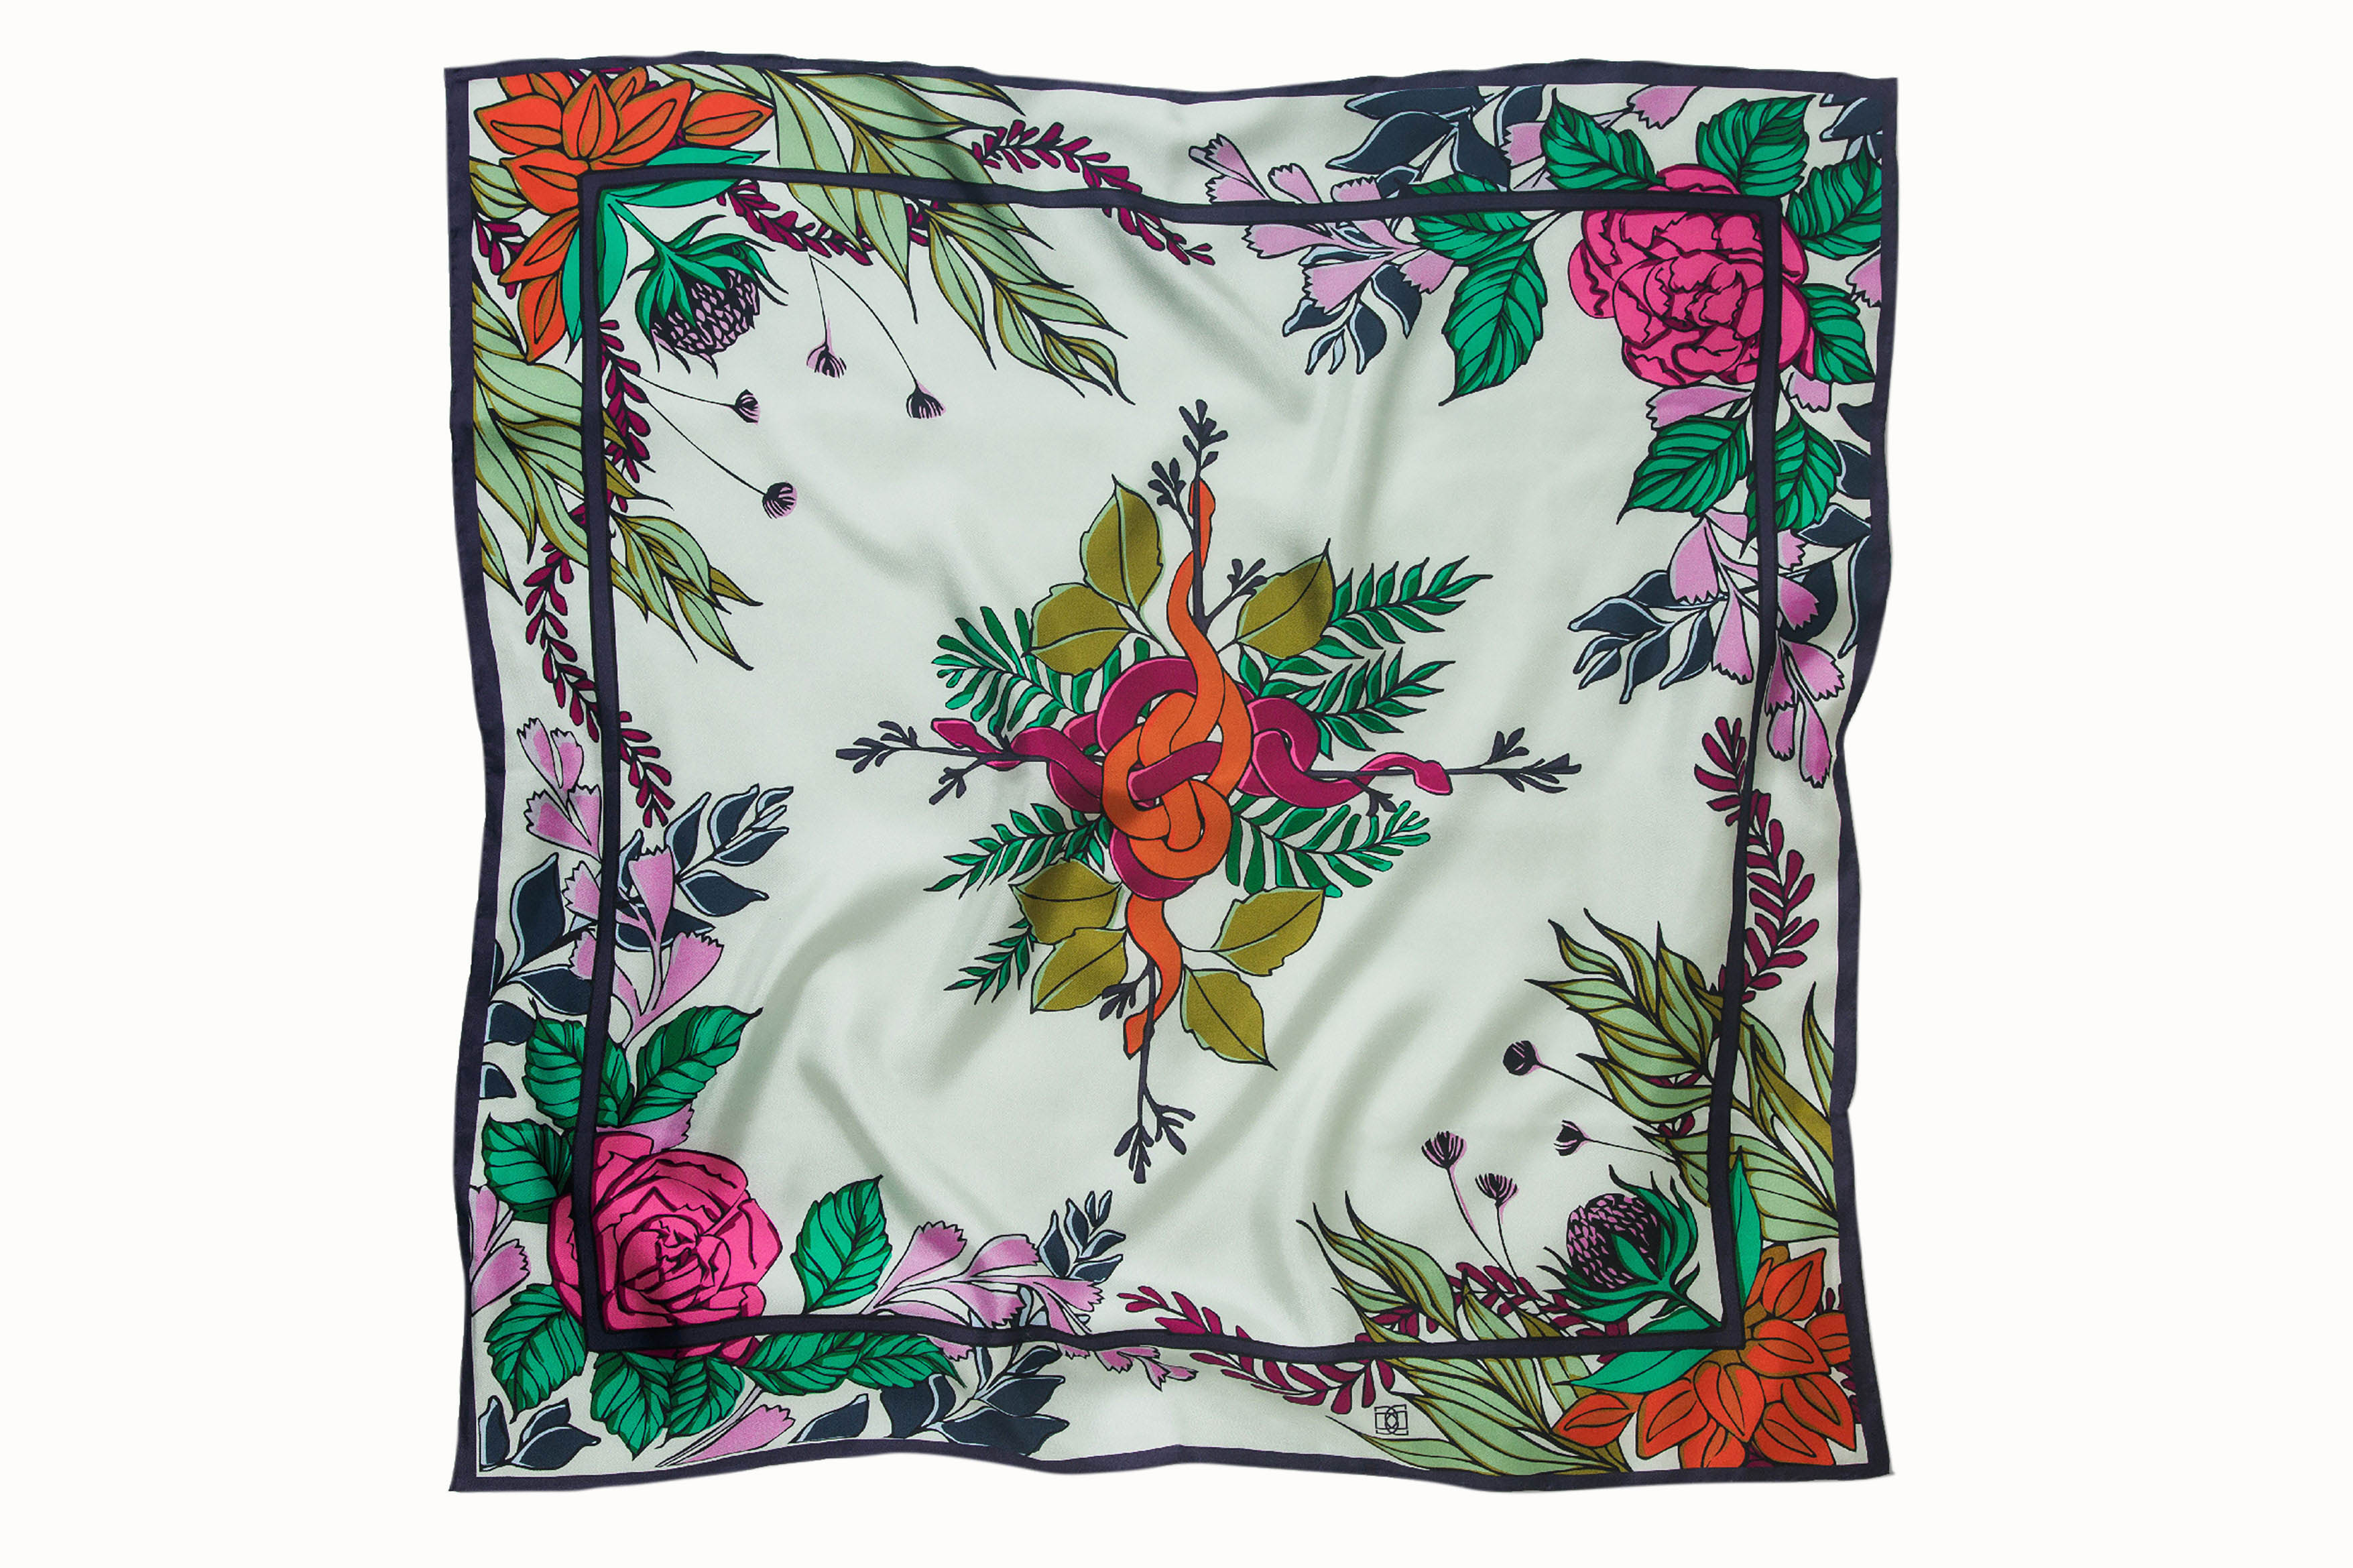 Flatlay image of 100% silk square scarf featuring a motif of bright, bold florals and greenery around the border as well as in the center of the scarf wrapped around two knotted garden snakes. Colors featured in include various shades of vibrant green, orange, lilac and rose pink on a very light and soft mint background.